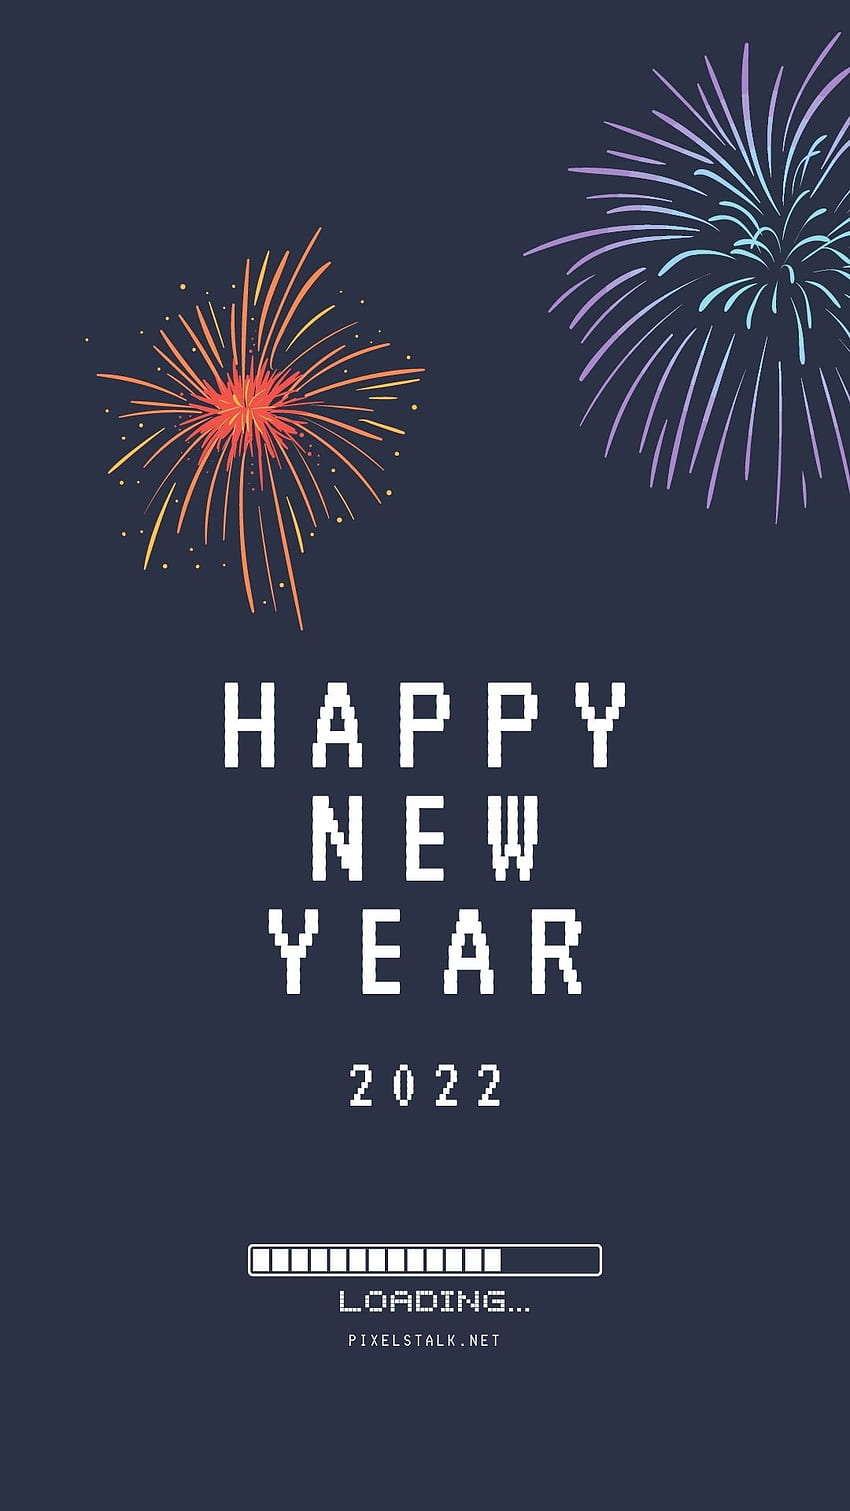 Download Happy New Year 2023 Wallpaper Free for Android  Happy New Year  2023 Wallpaper APK Download  STEPrimocom